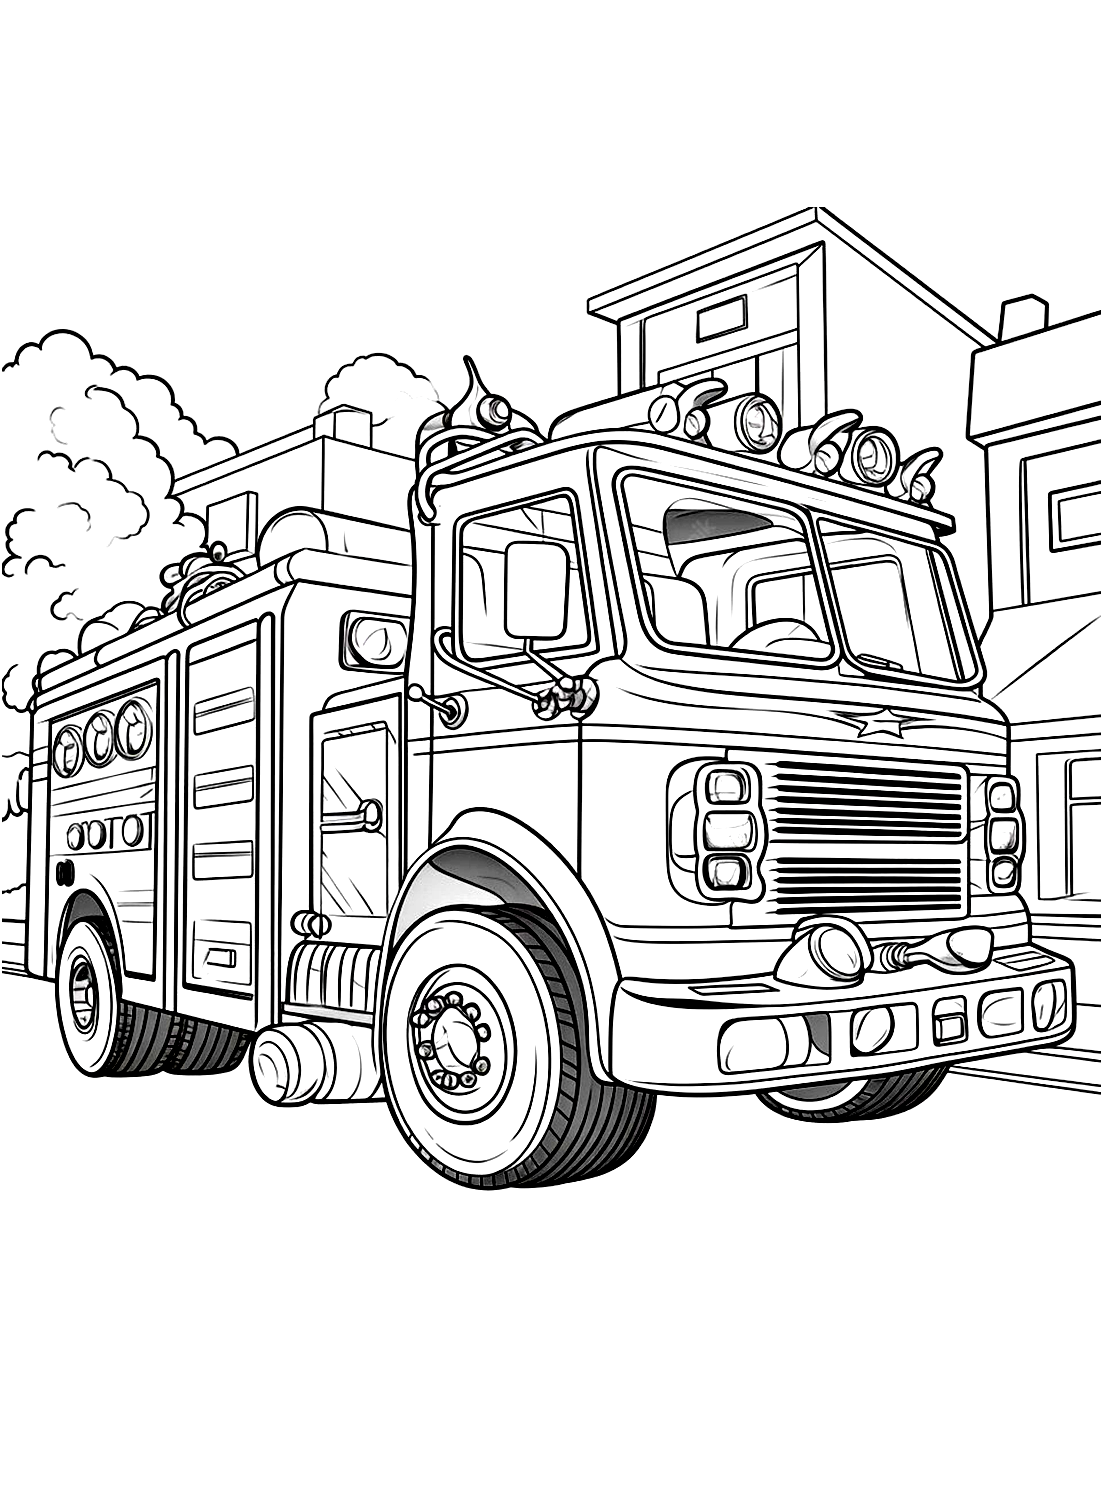 Fire truck drawing easy